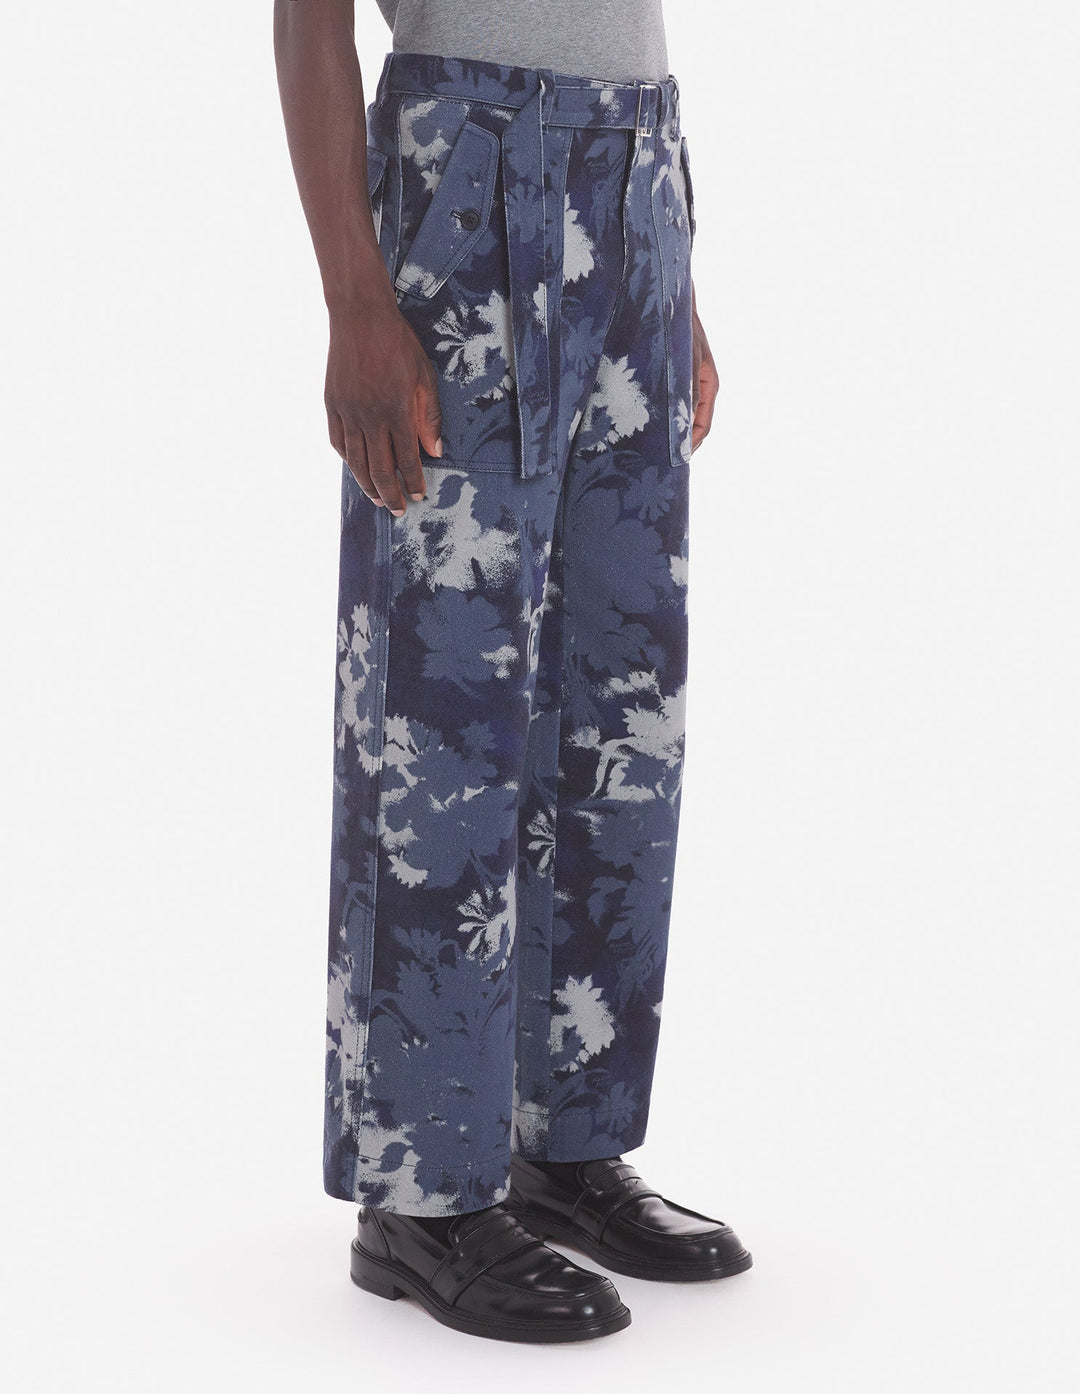 WORKWEAR PANTS IN BOUQUET CAMEO PRINTED COTTON DRI